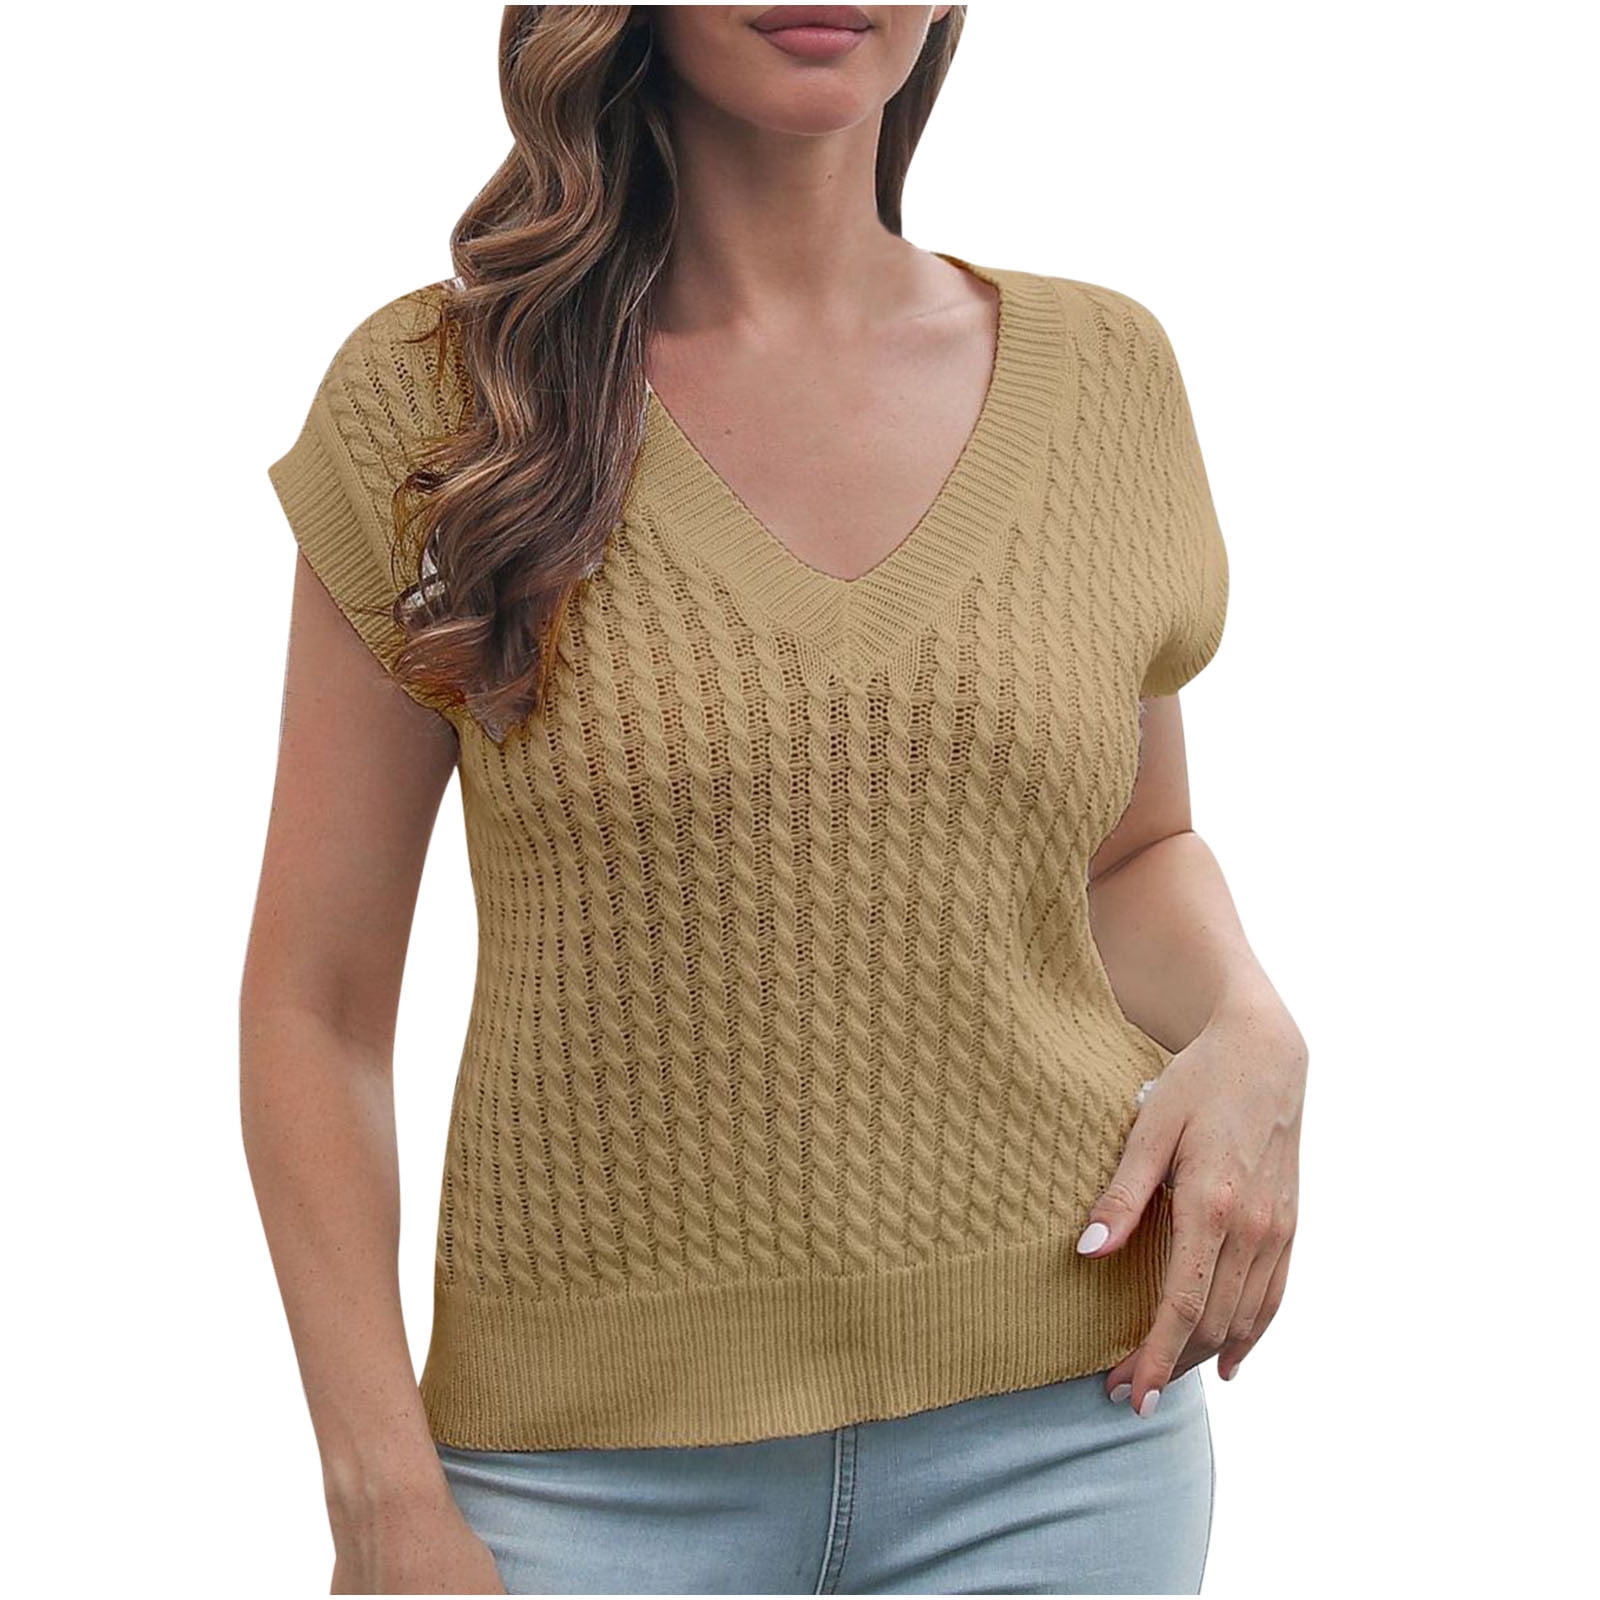 Sweater Vests for Women